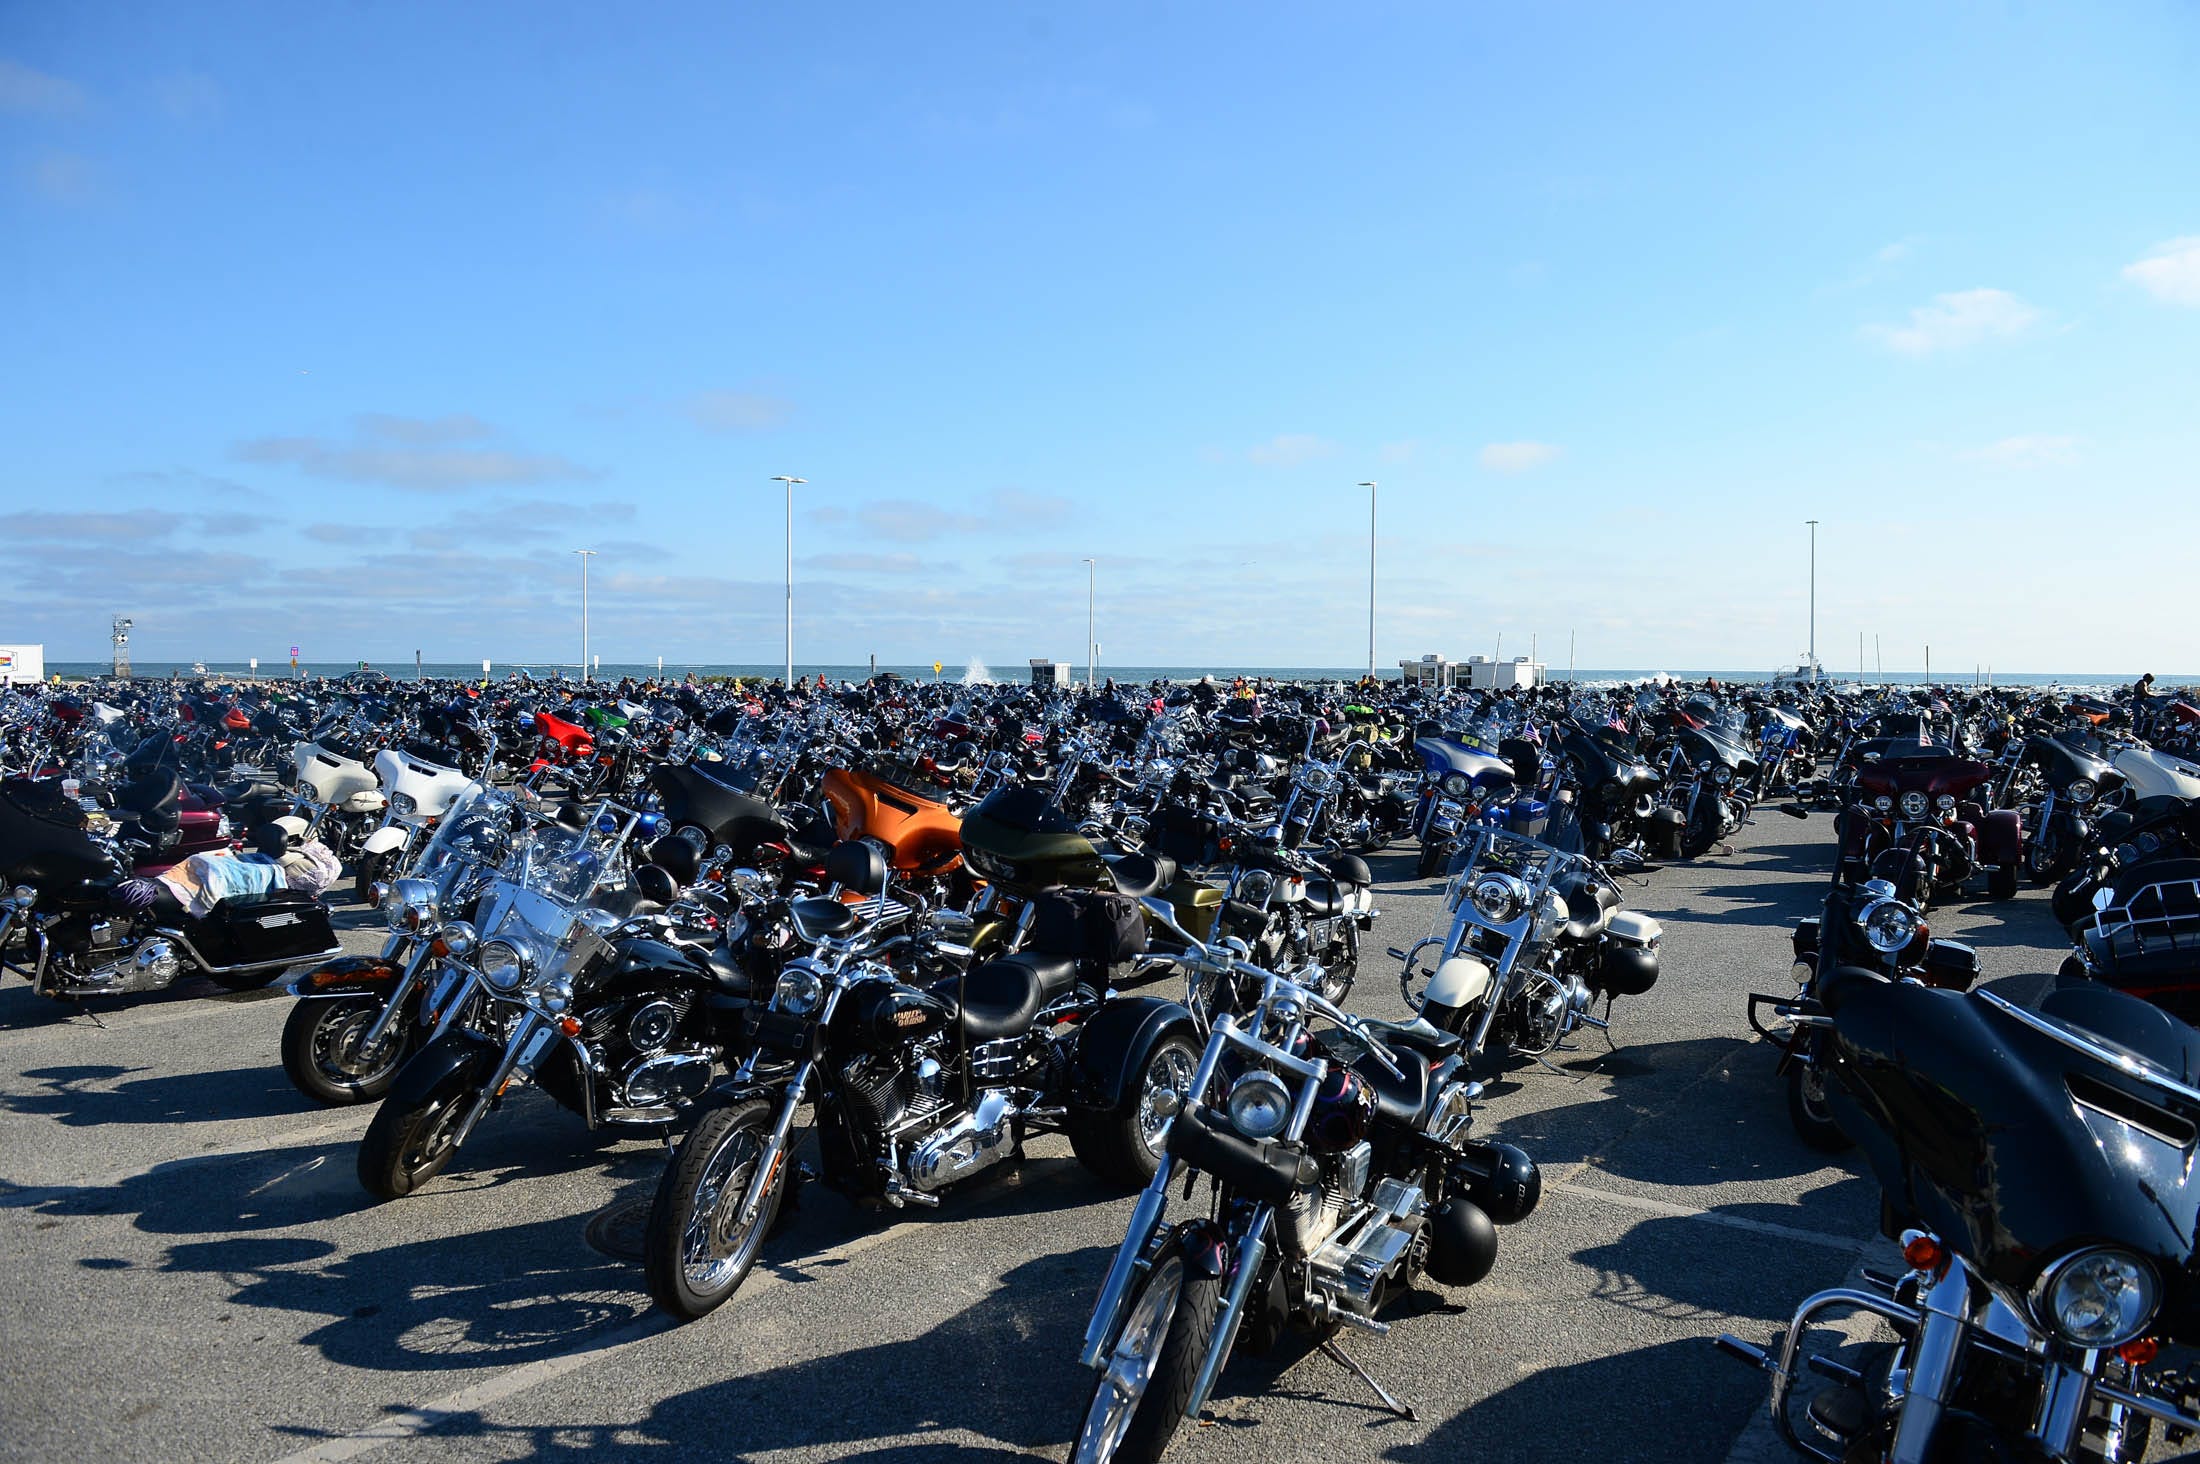 Delmarva Bike Week, OC BikeFest end quietly after accidents early on